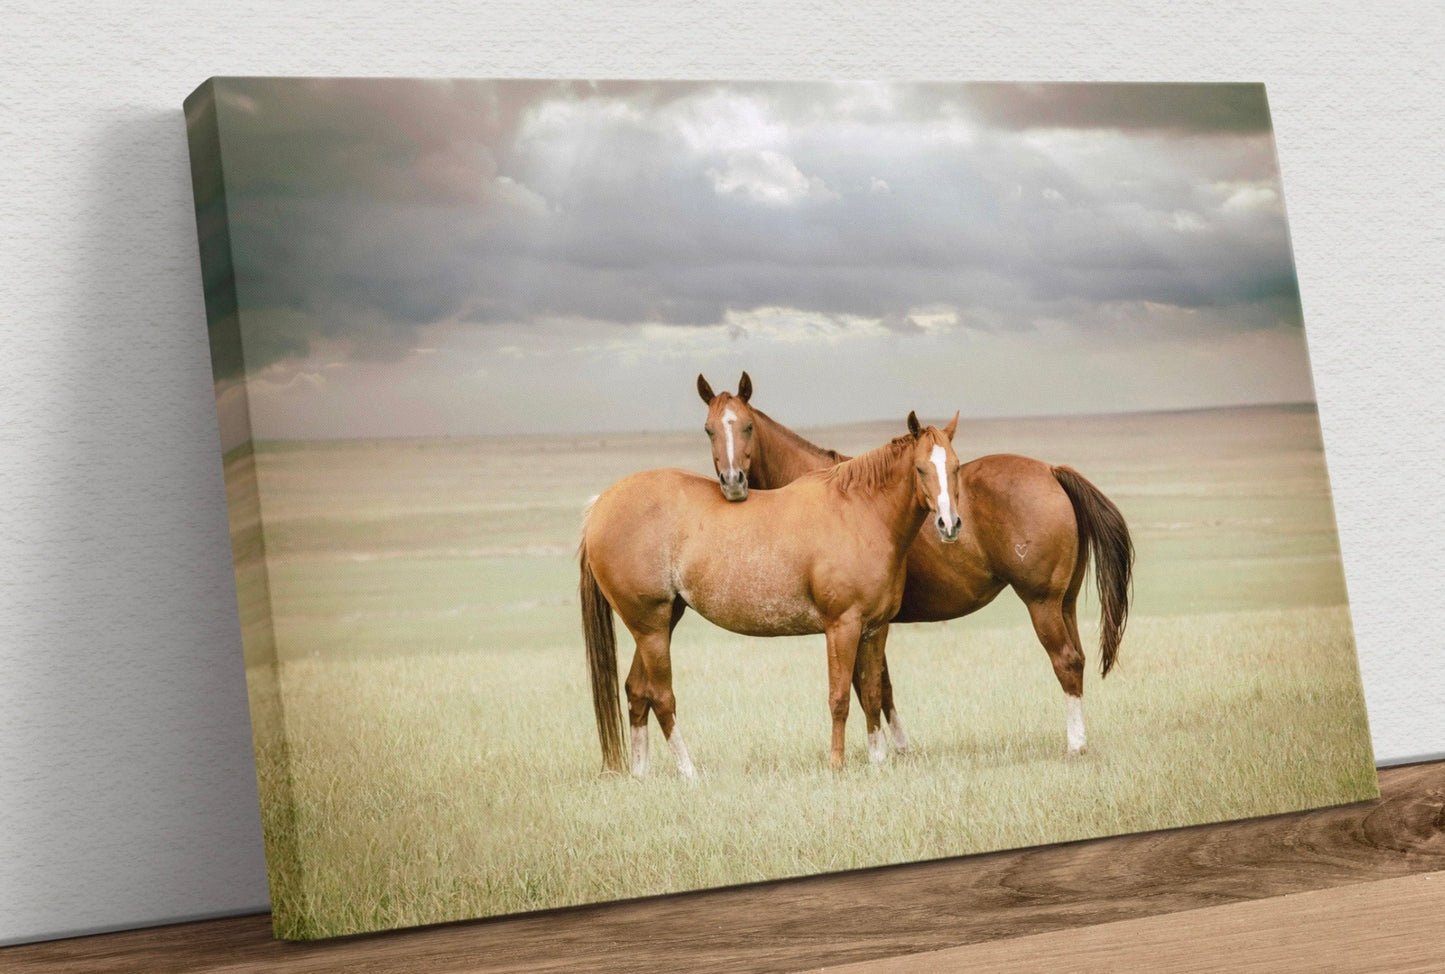 Cowboy Art - Quarter Horses and Stormy Sky Canvas-Unframed / 12 x 18 Inches Wall Art Teri James Photography